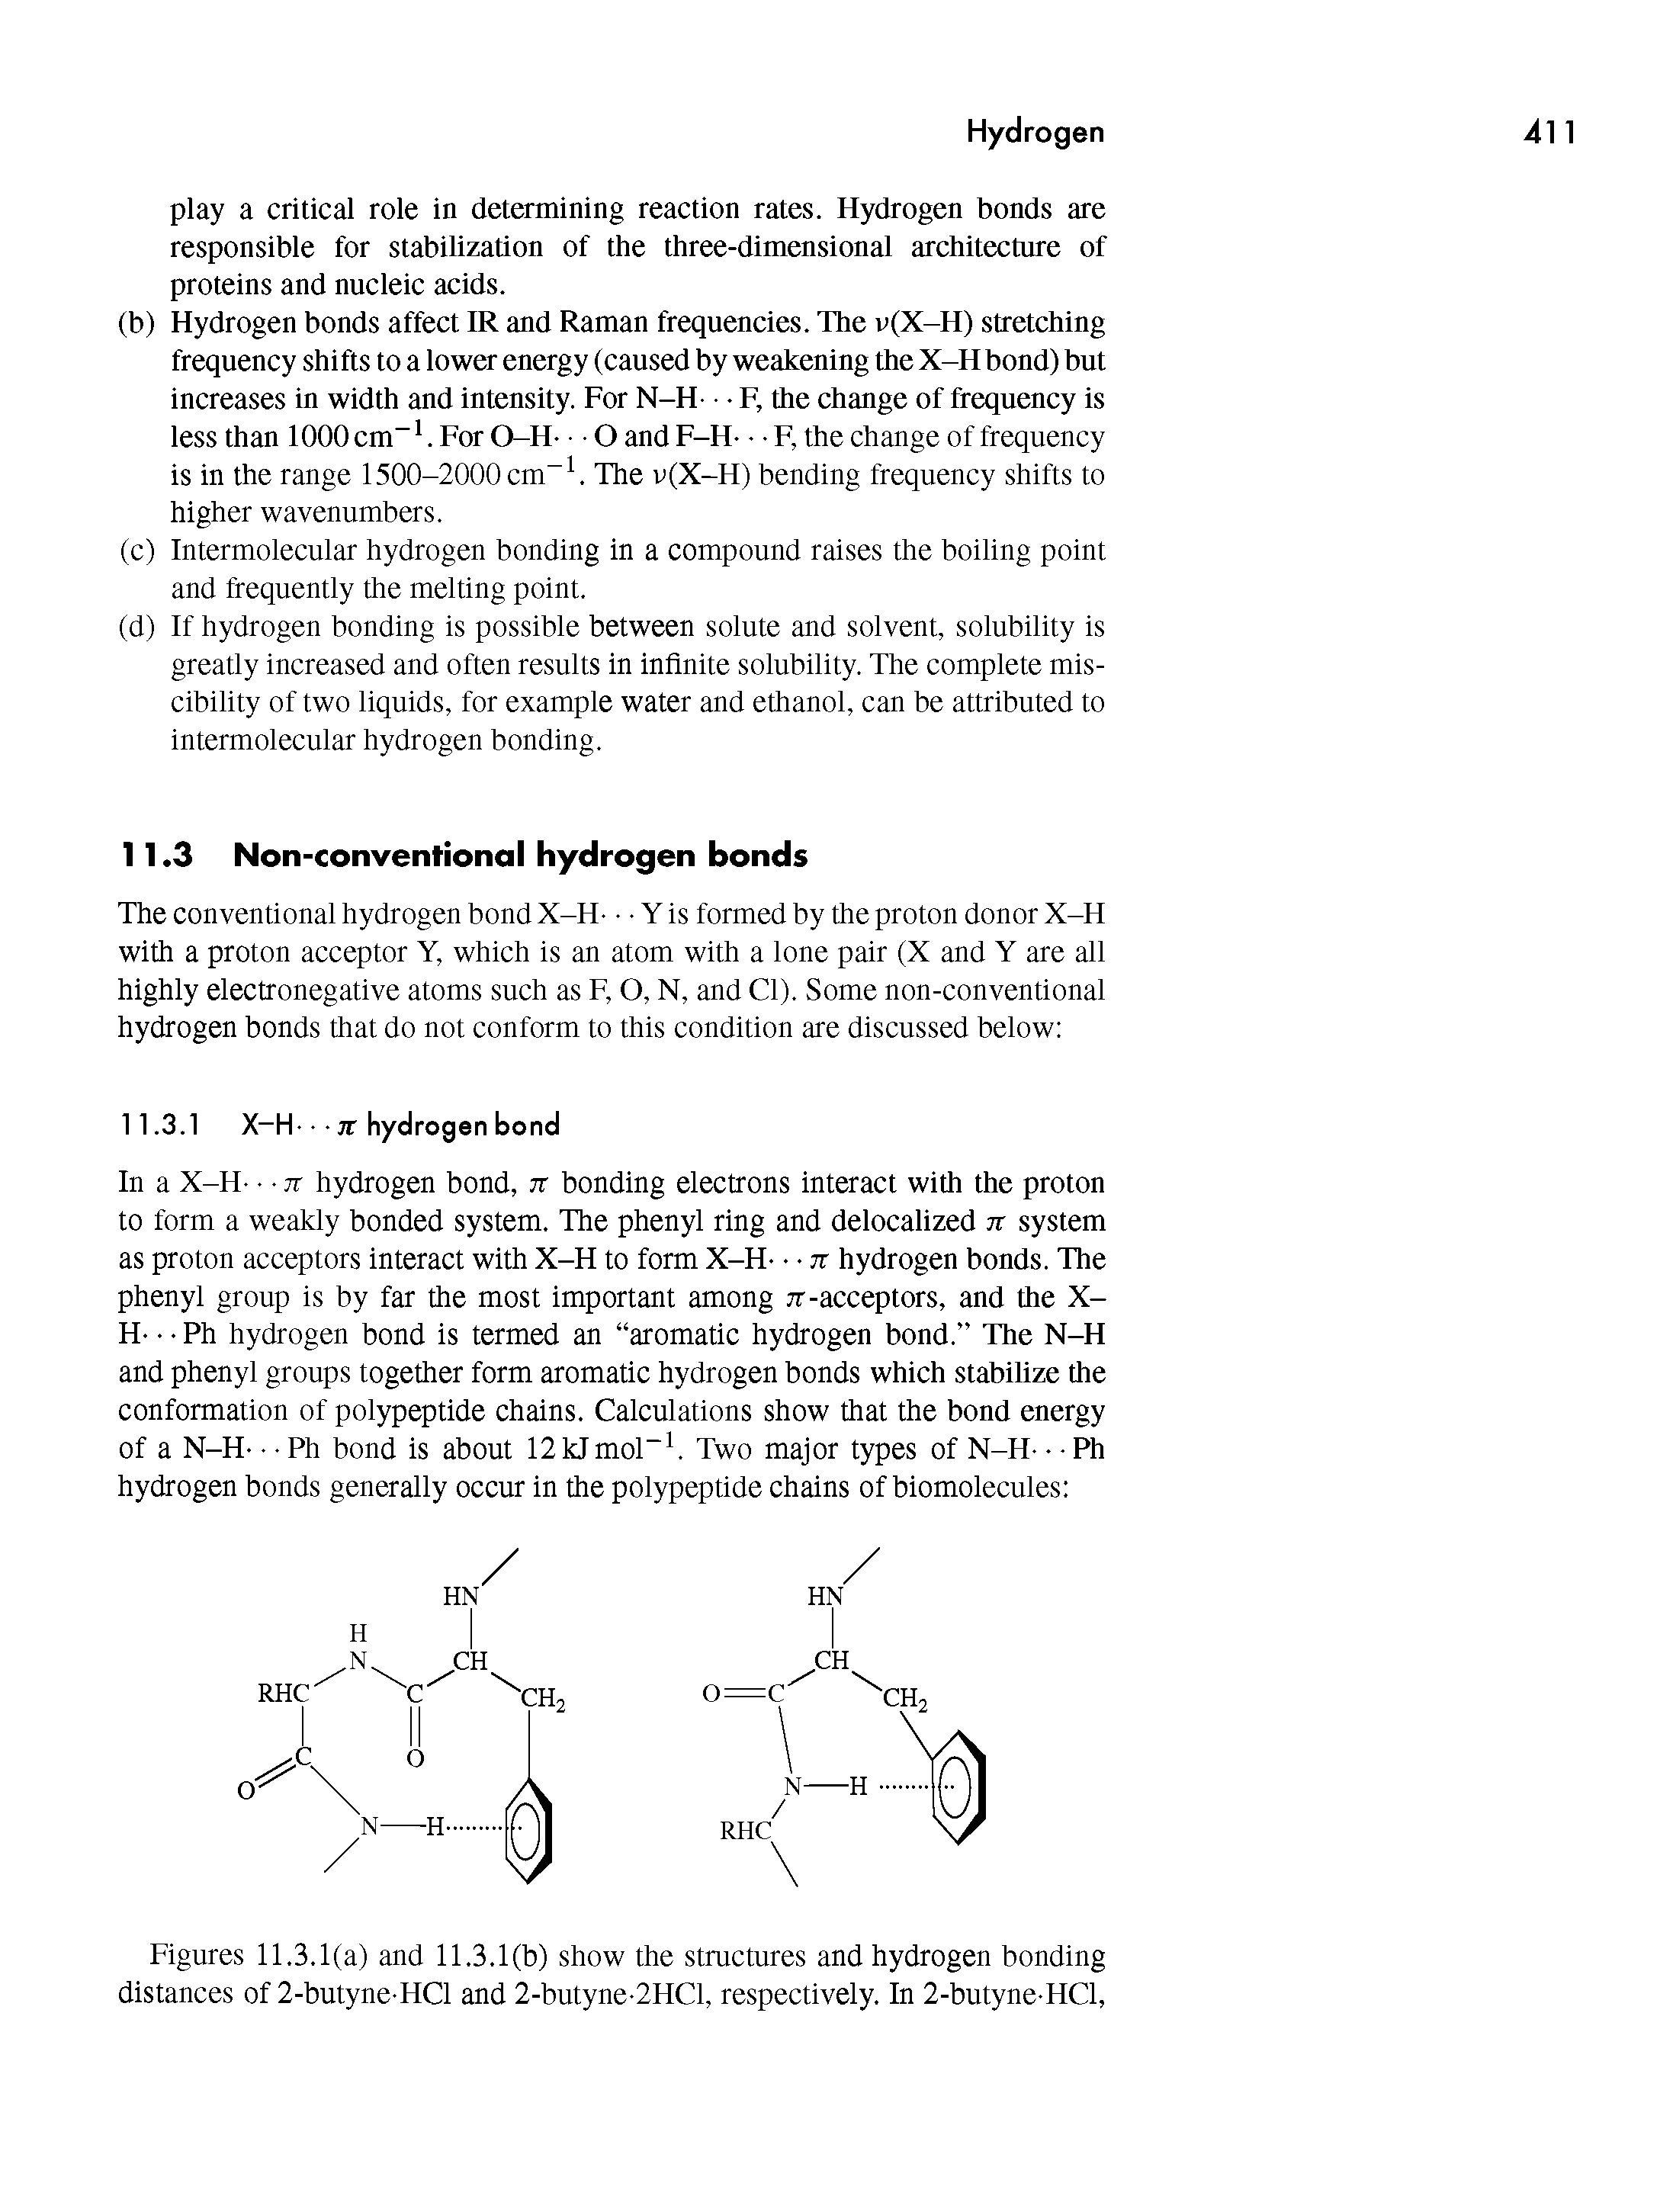 Figures 11.3.1(a) and 11.3.1(b) show the structures and hydrogen bonding distances of 2-butyne-HCl and 2-butyne-2HCl, respectively. In 2-butyne-HCl,...